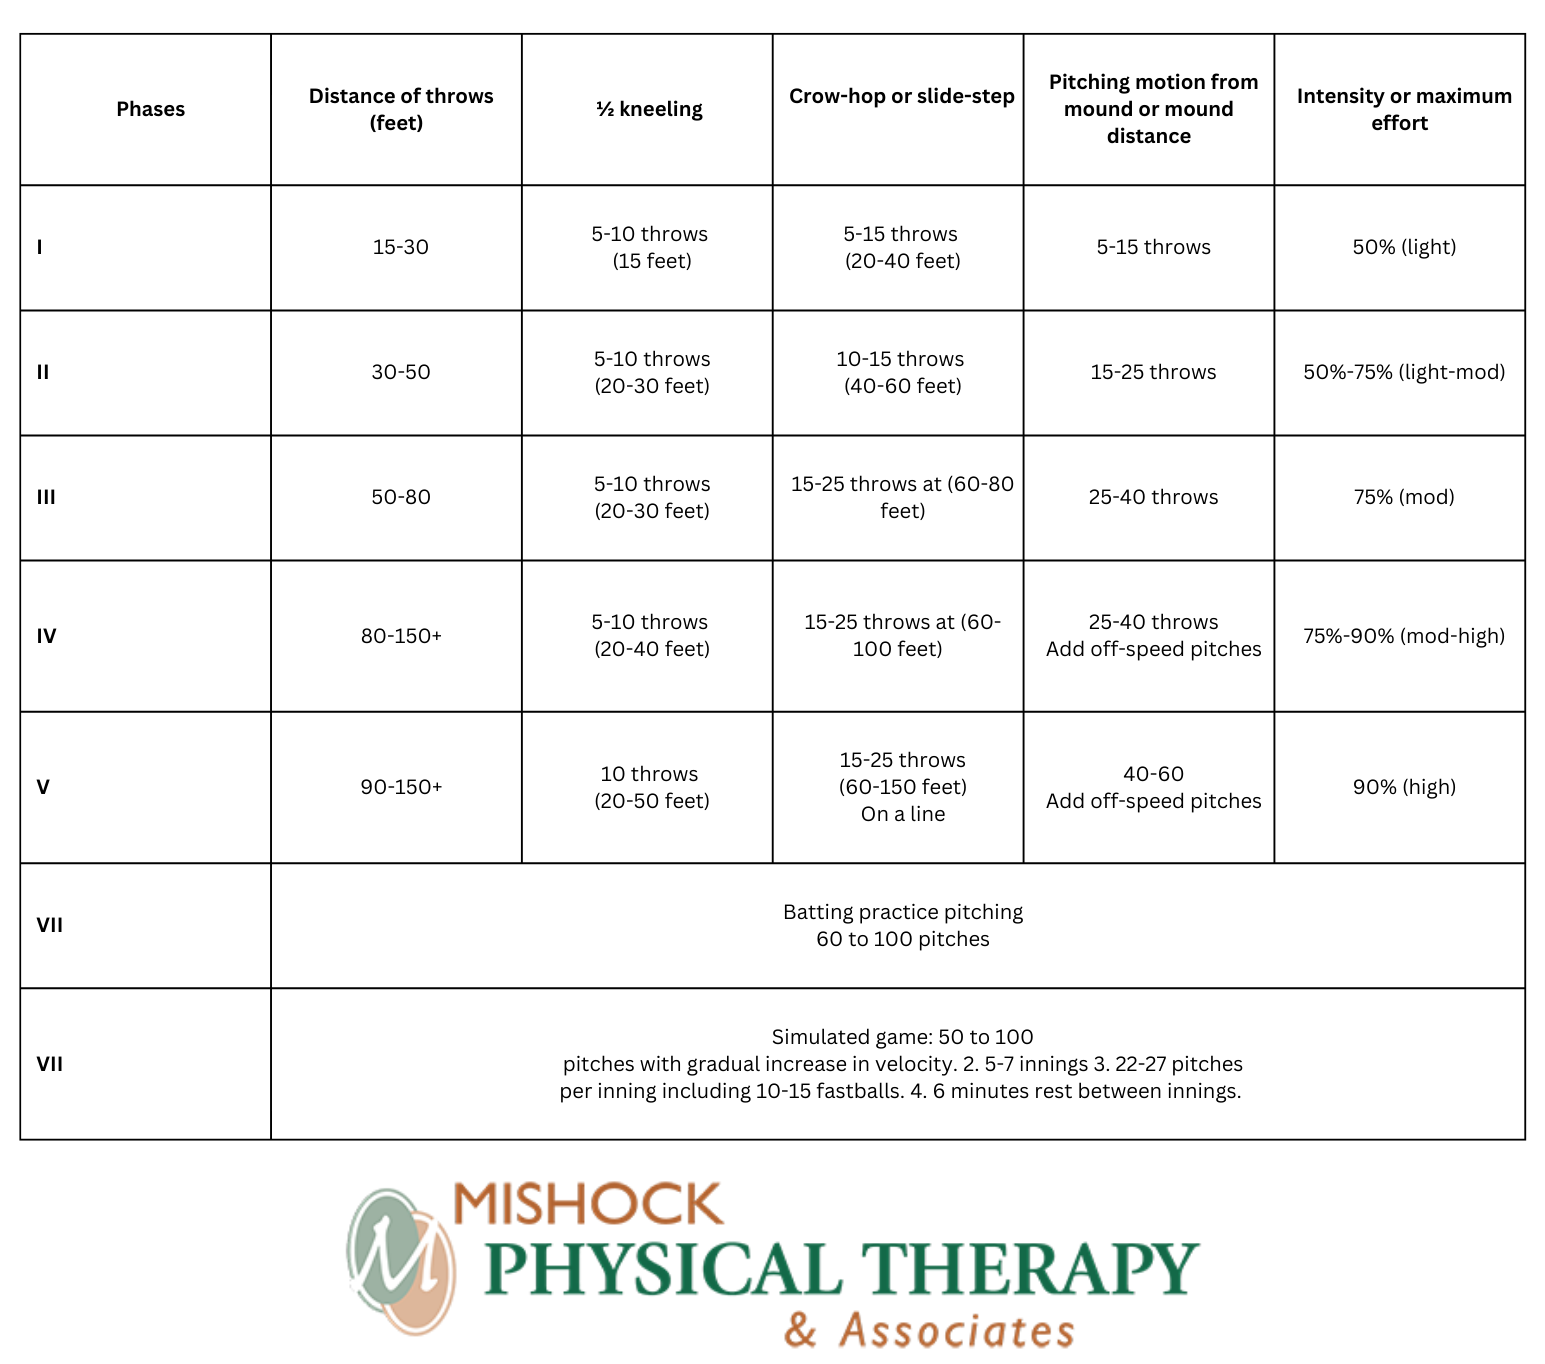 Throwing Program Guideline: Return from injury by Dr. John Mishock at Mishock Physical Therapy